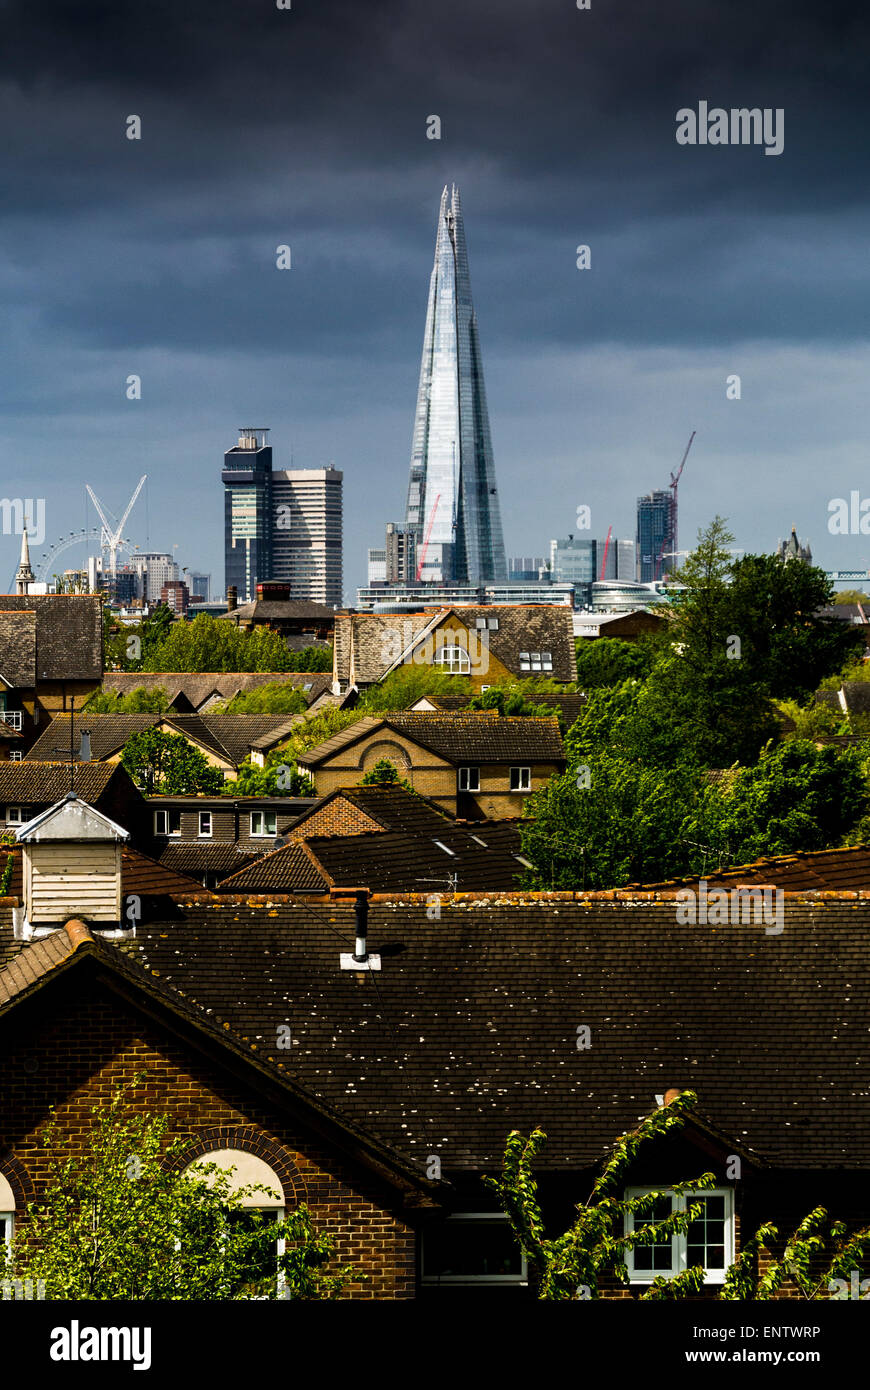 View of The Shard and residential houses from Stave Hill, Rotherhithe, London. Stock Photo